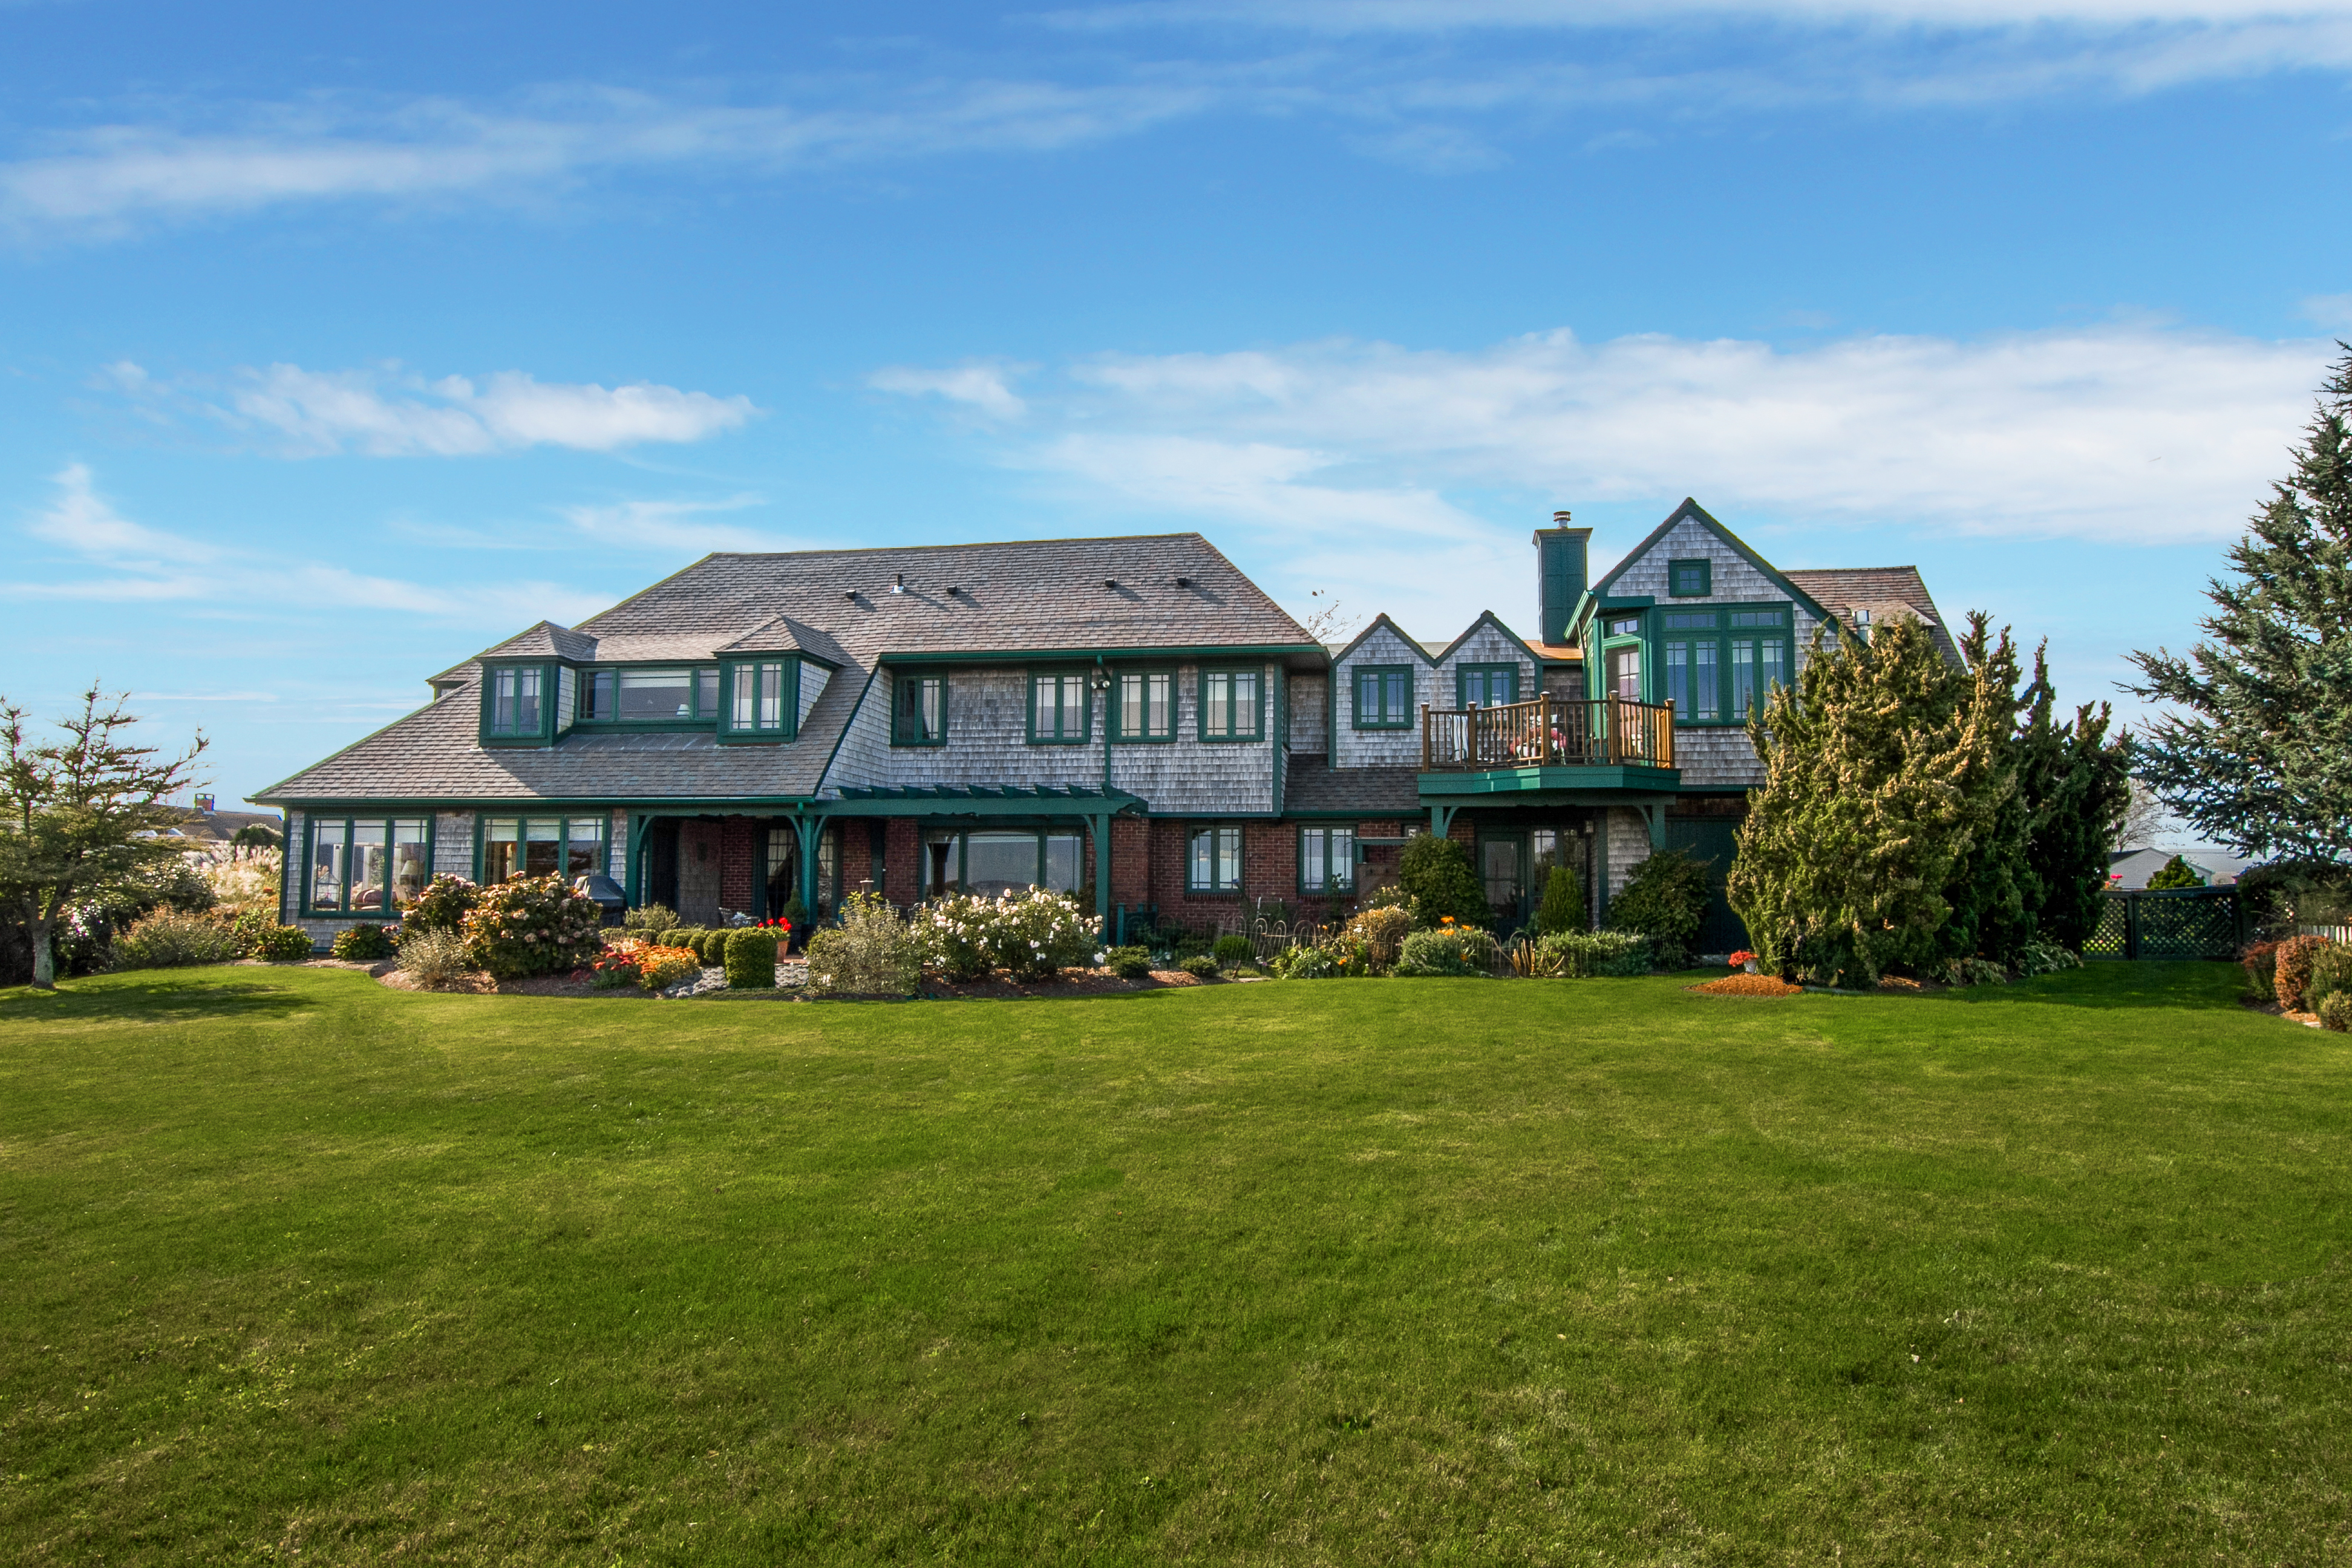 WATERFRONT HOME IN NARRAGANSETT’S  BONNET SHORES SELLS FOR OVER $2M